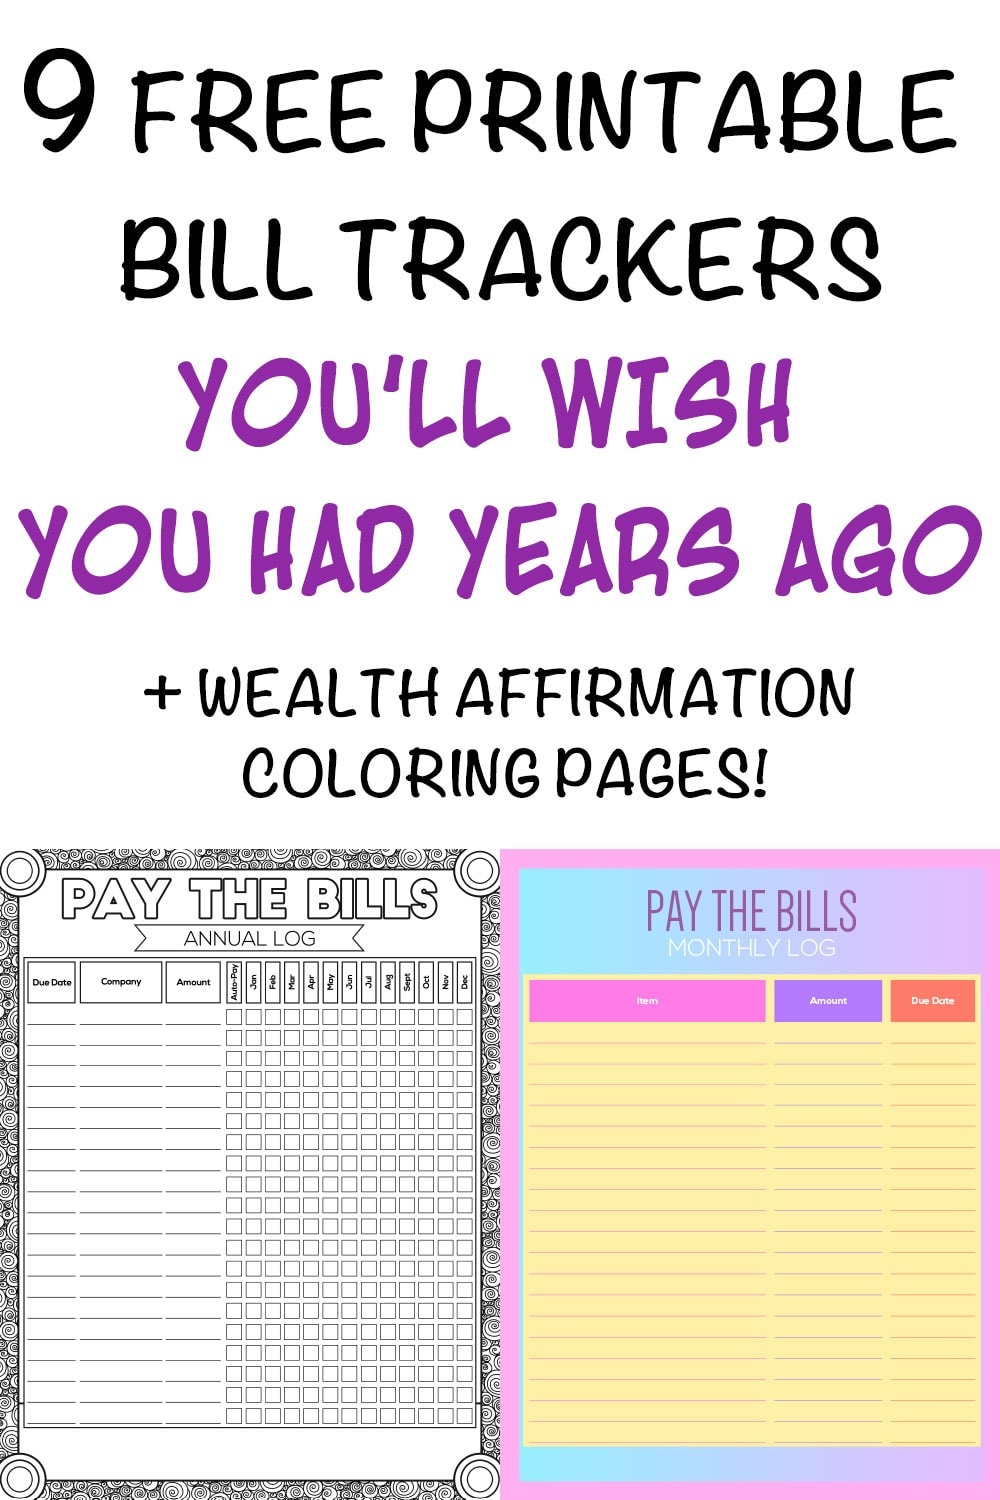 9 Printable Bill Payment Checklists And Bill Trackers - The Artisan Life - Free Printable Bill Pay Checklist